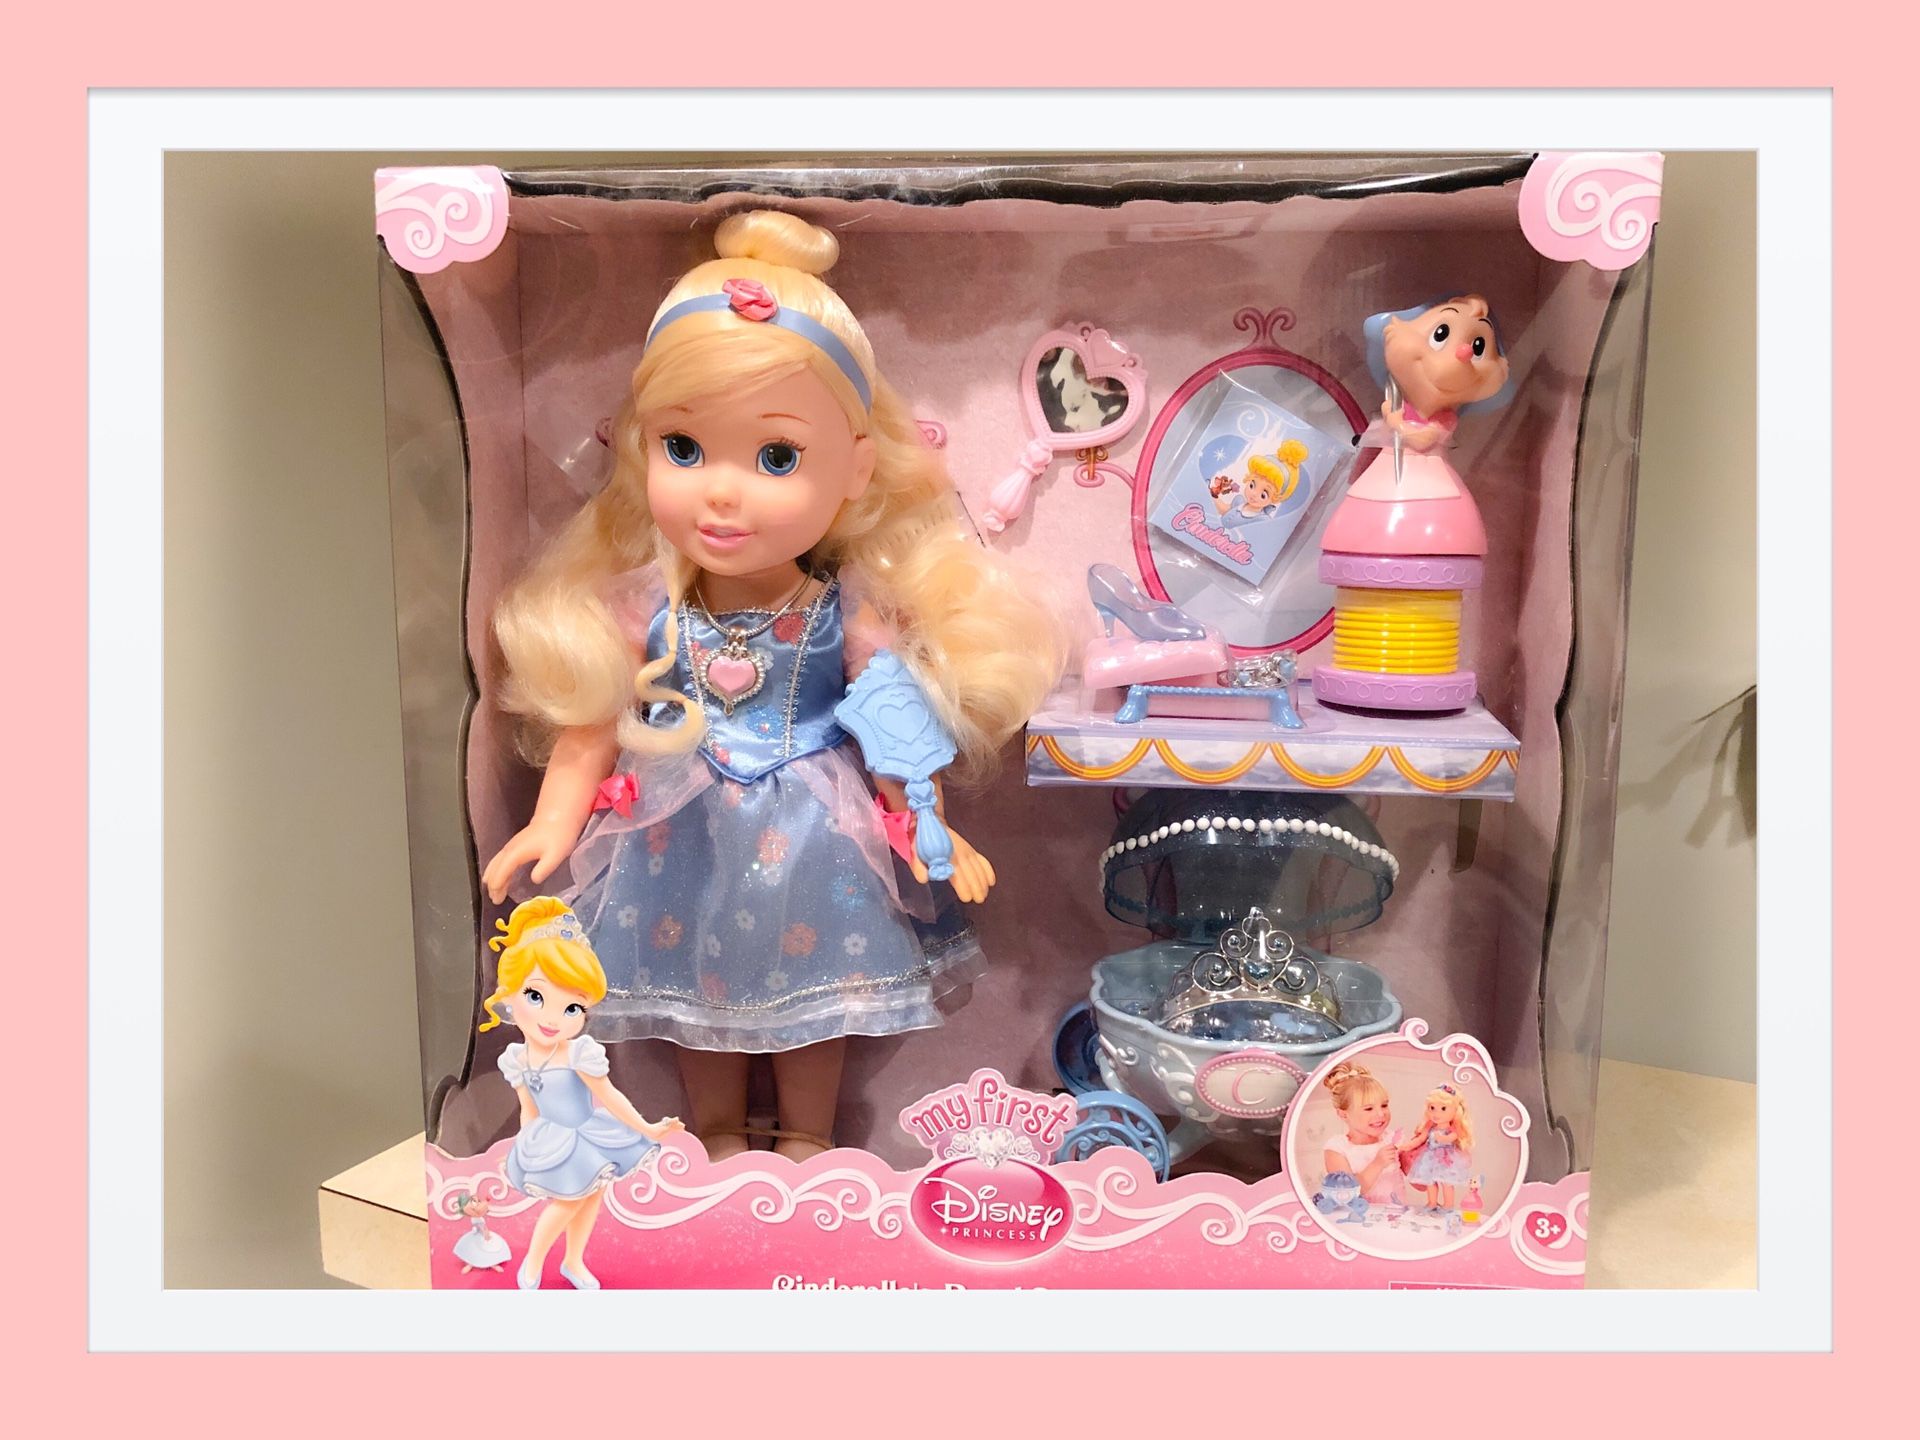 My First Disney Princess 15 in Cinderella's Royal Dress up Party Doll Set New in Box